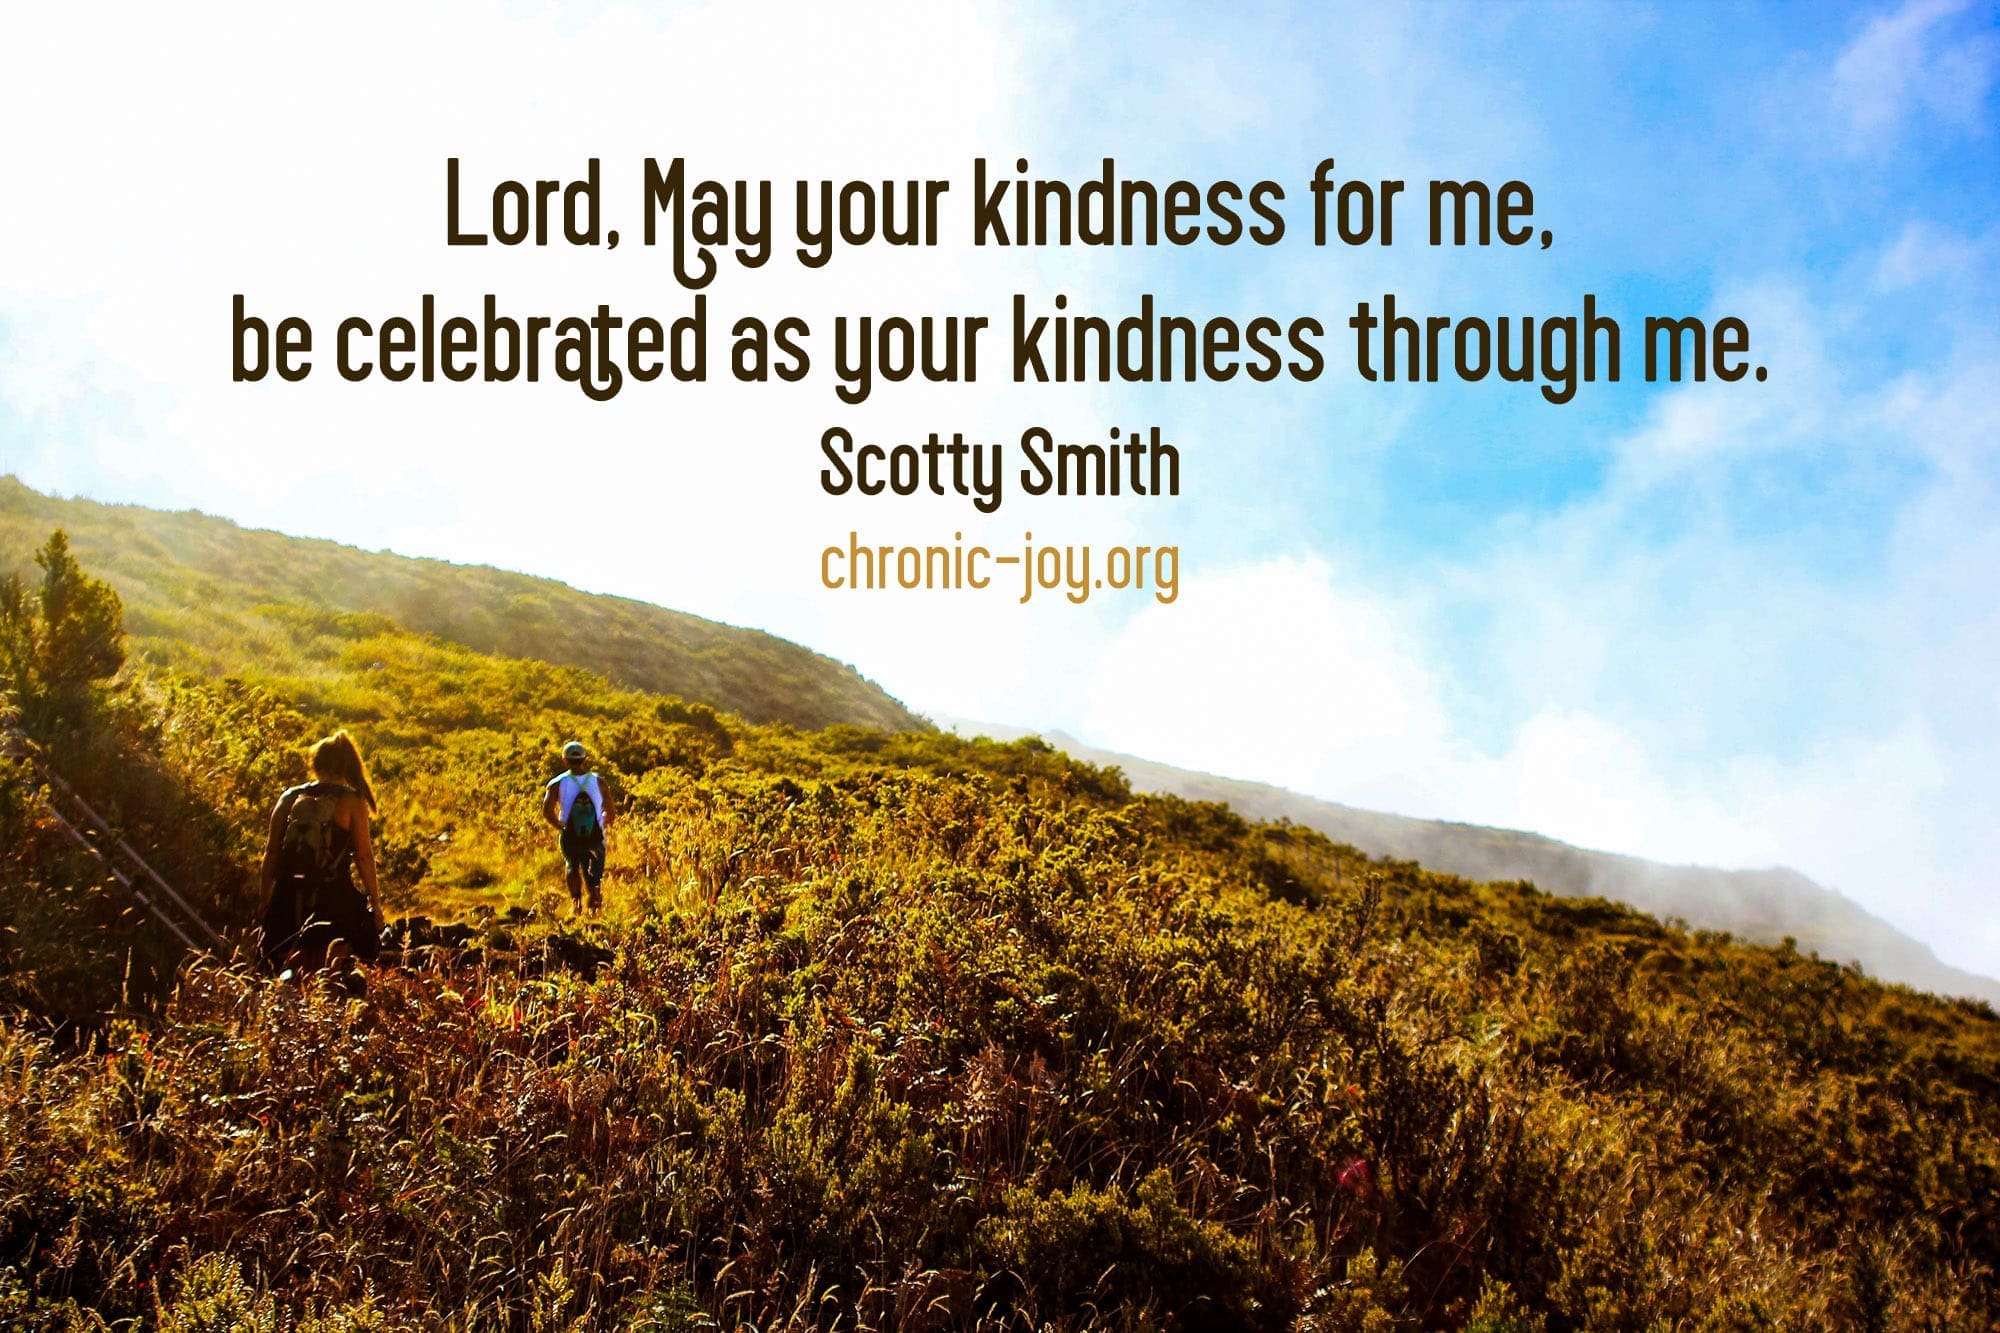 "Lord, Lay your kindness for me, be celebrated as your kindness through me." Scotty Smith